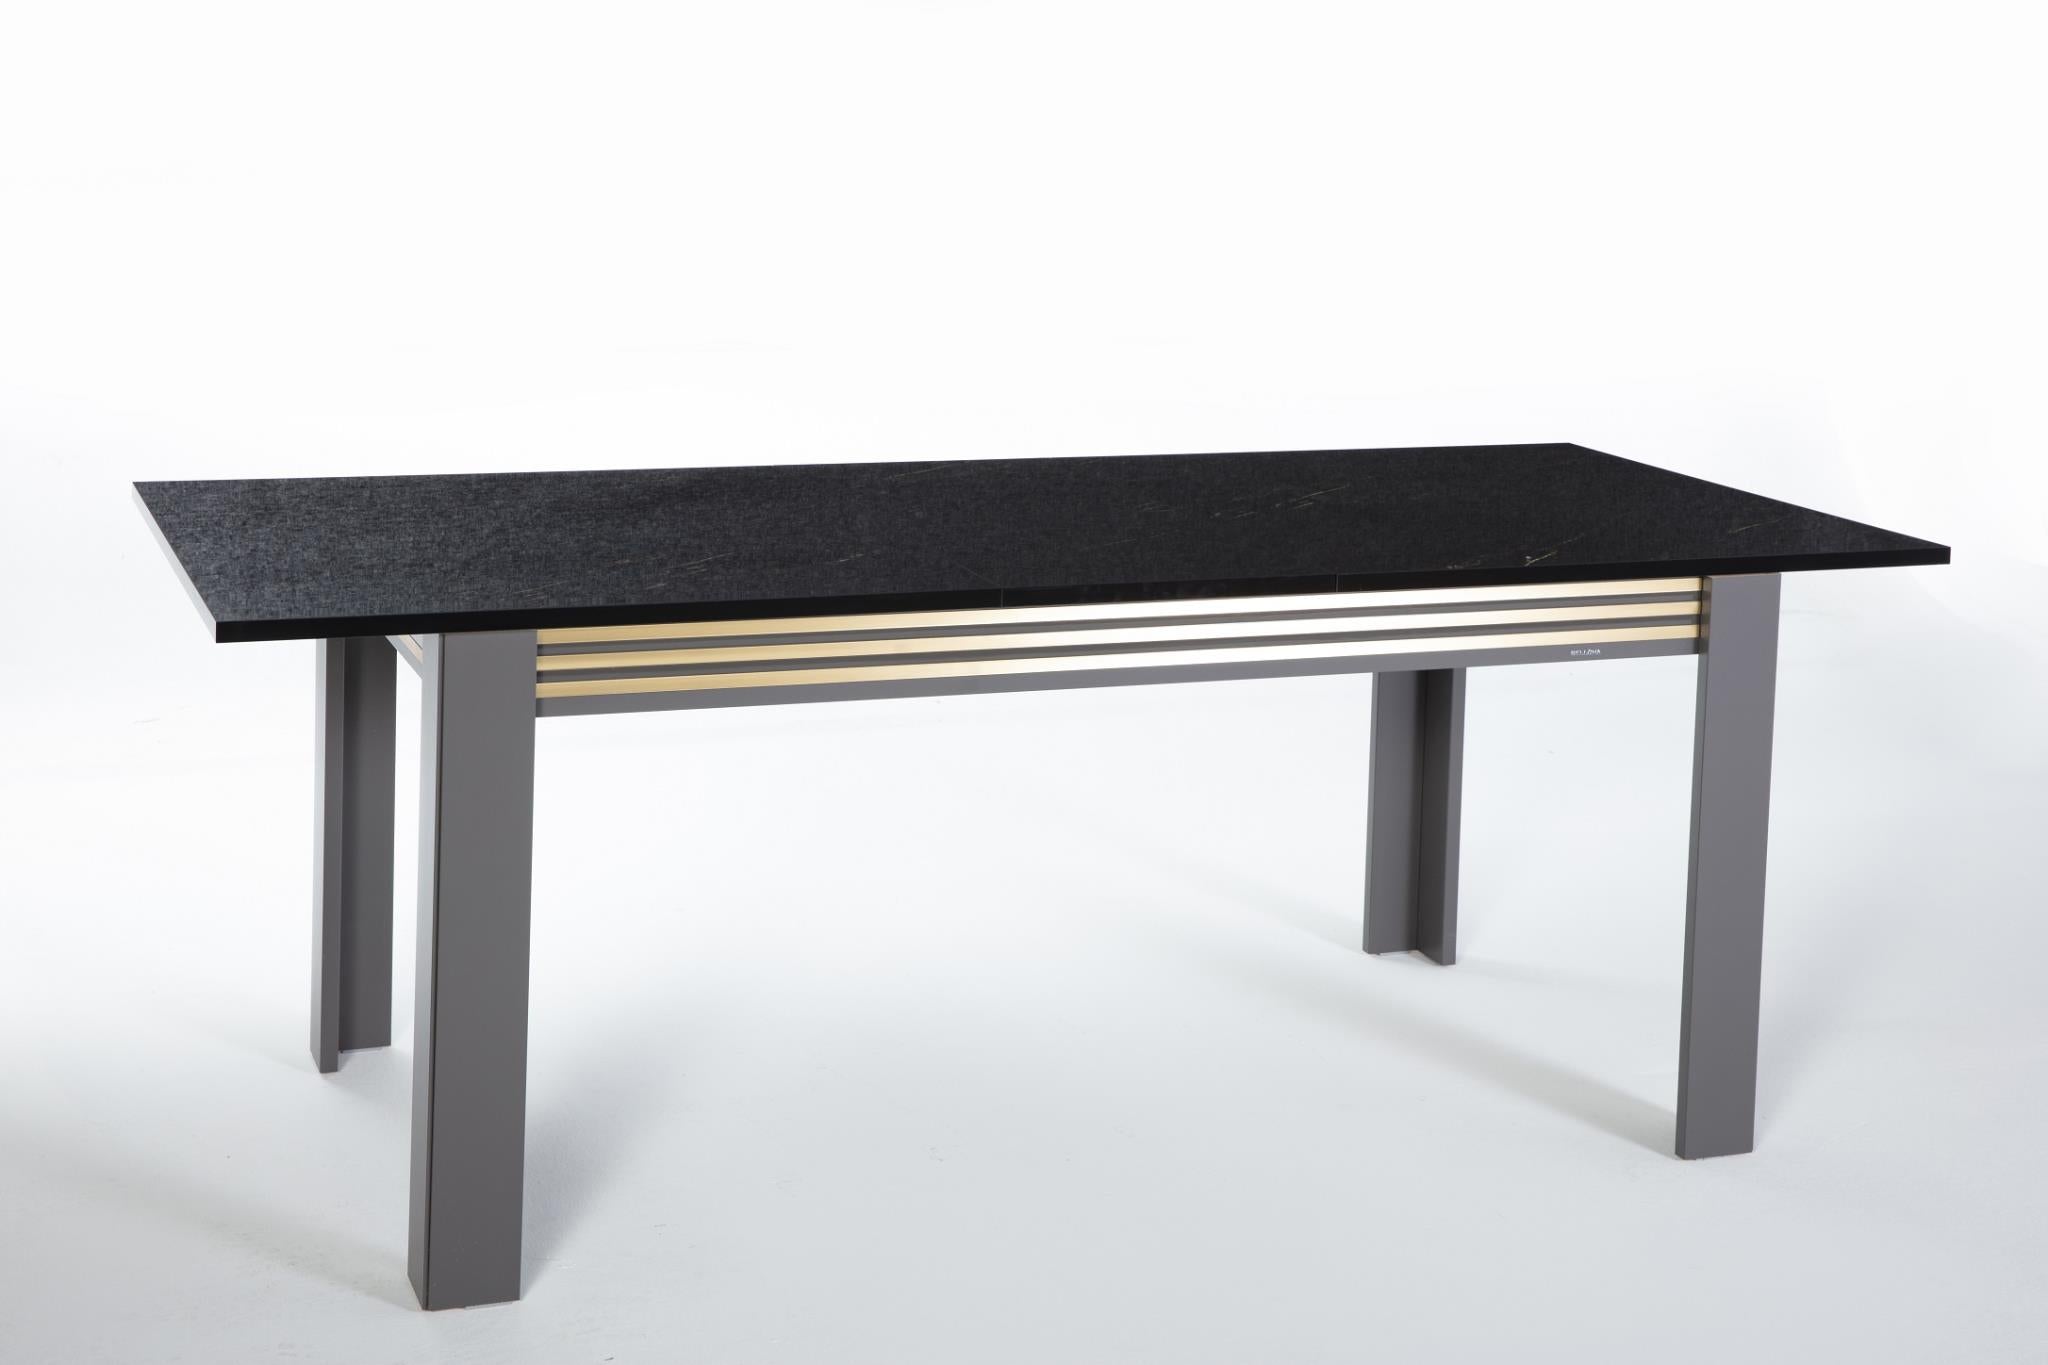 Carlino Expandable Dining Table by Bellona